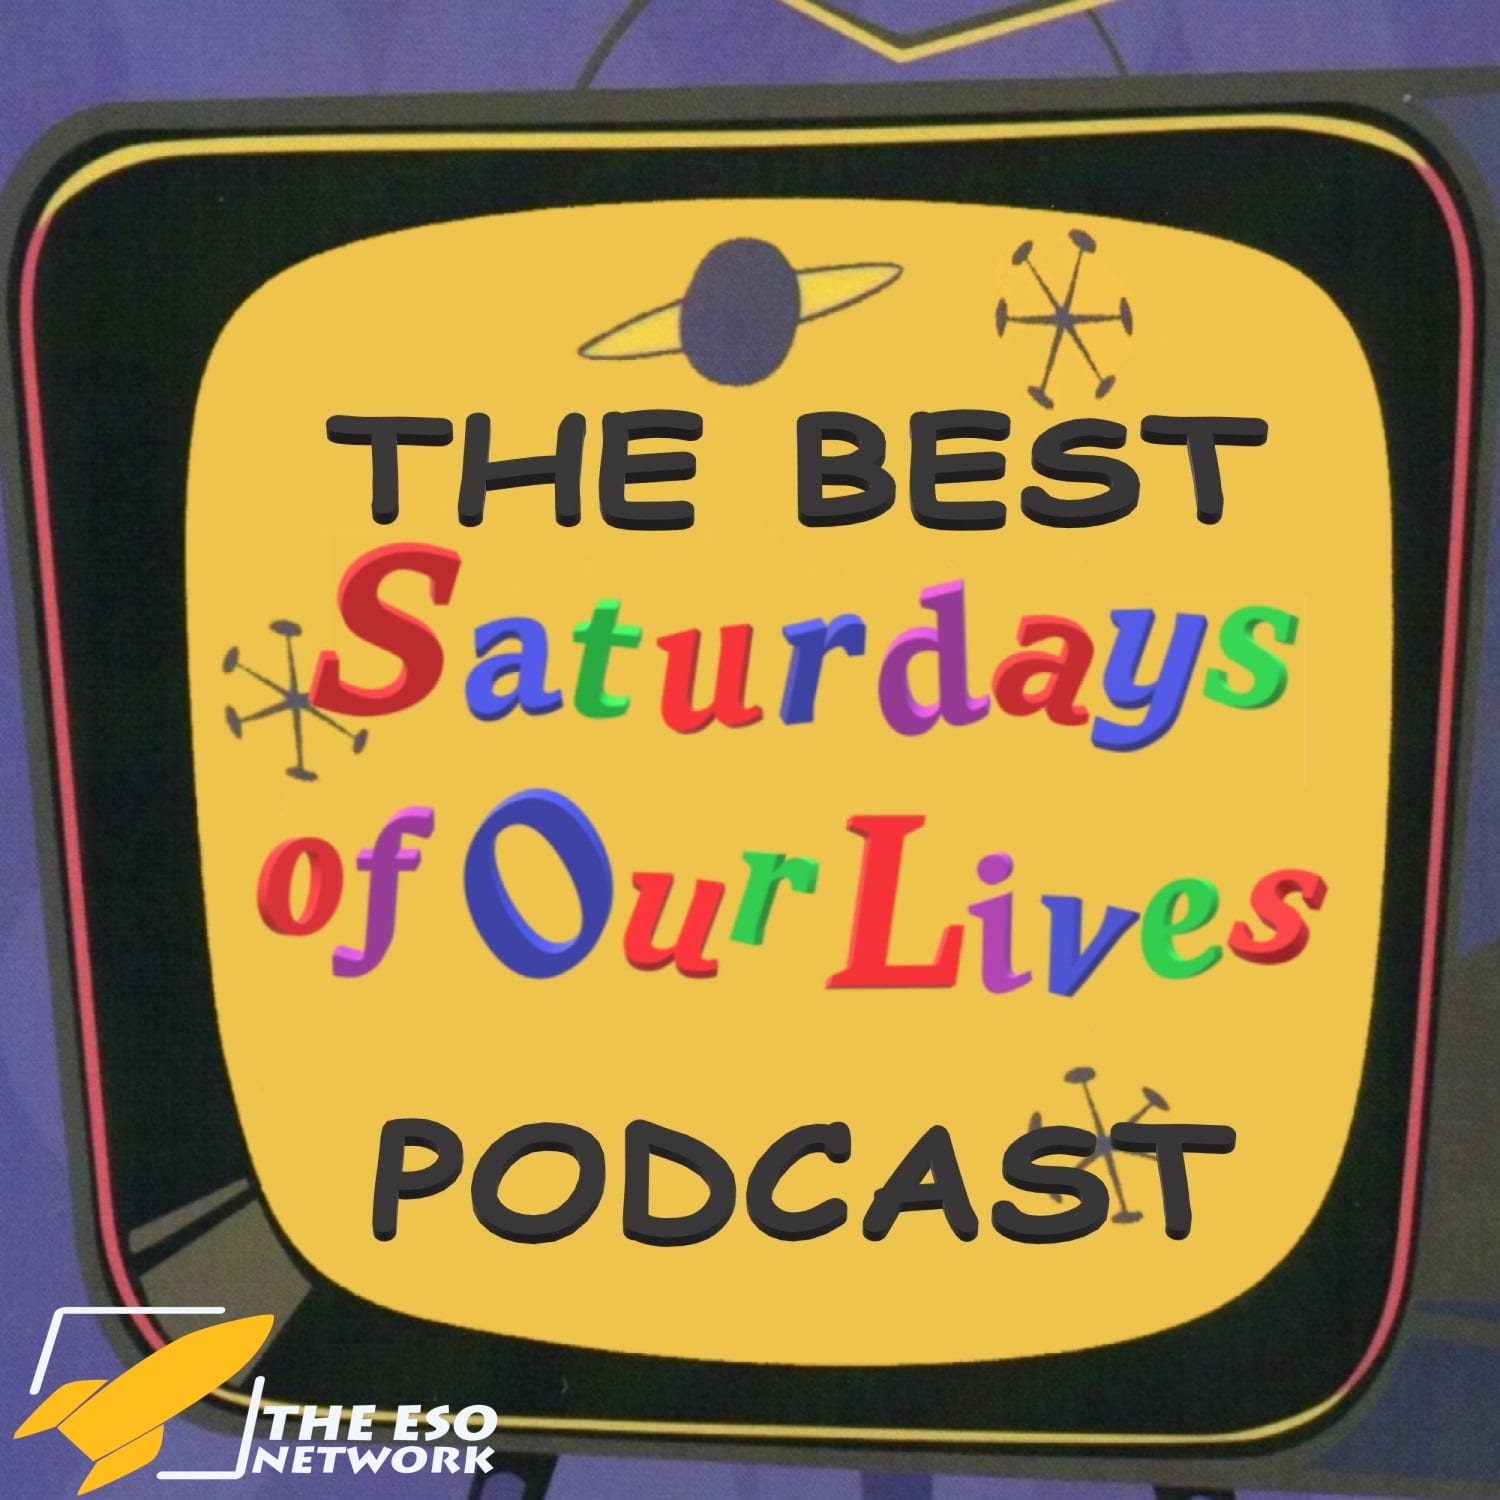 The Best Saturdays of Our Lives Podcast